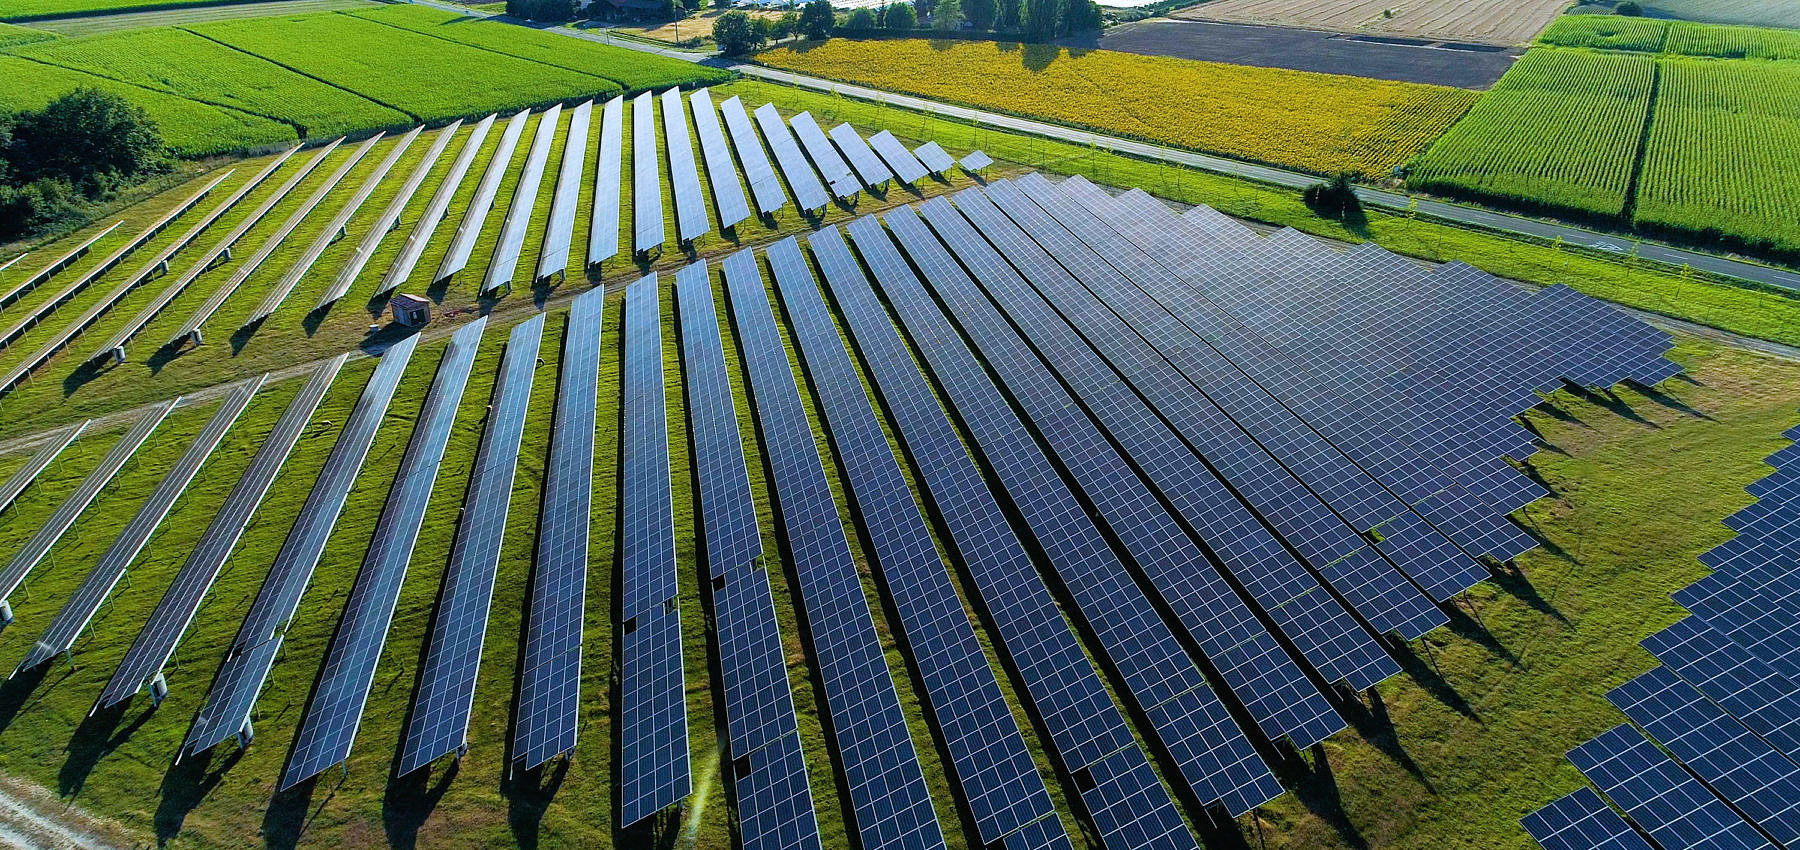 Solar panels among fields of crops